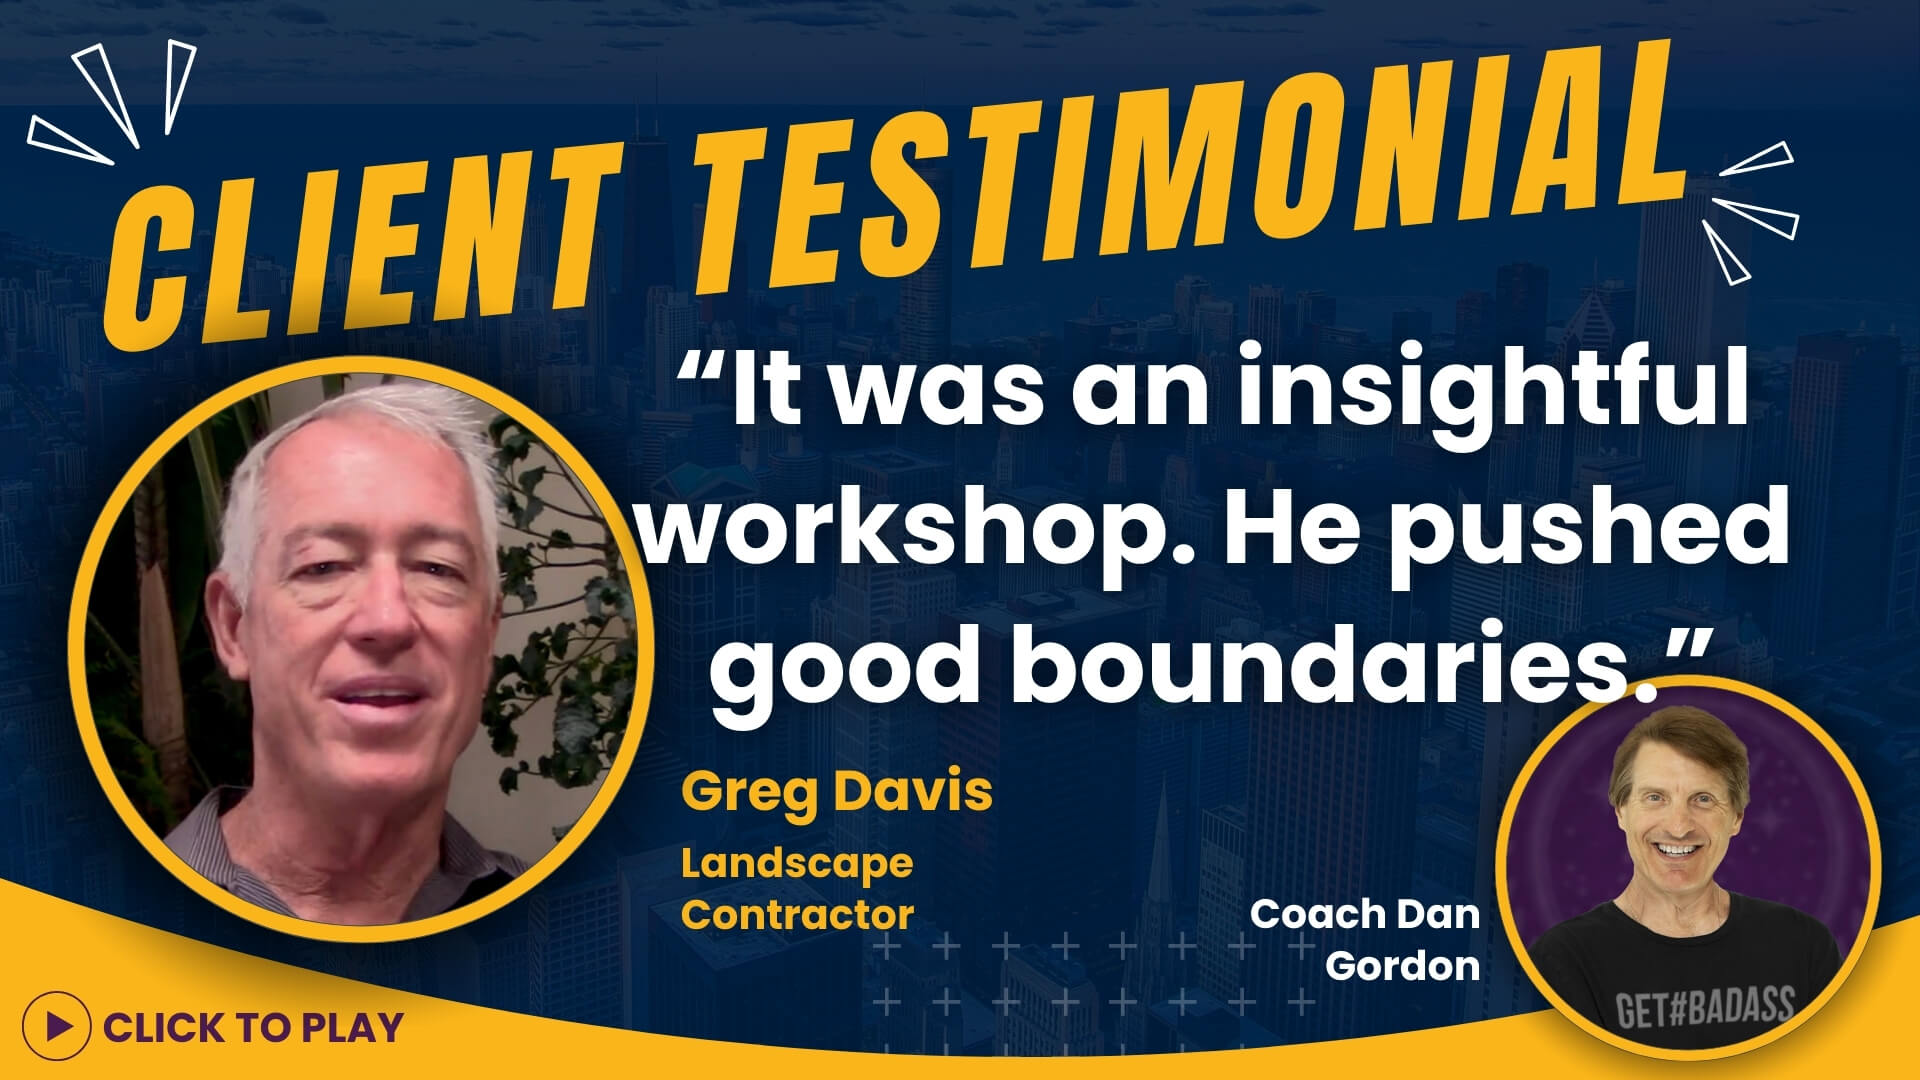 Landscape Contractor Greg Davis lauds Coach Dan Gordon for pushing boundaries during an insightful workshop, available to watch with a 'Click to Play' button.